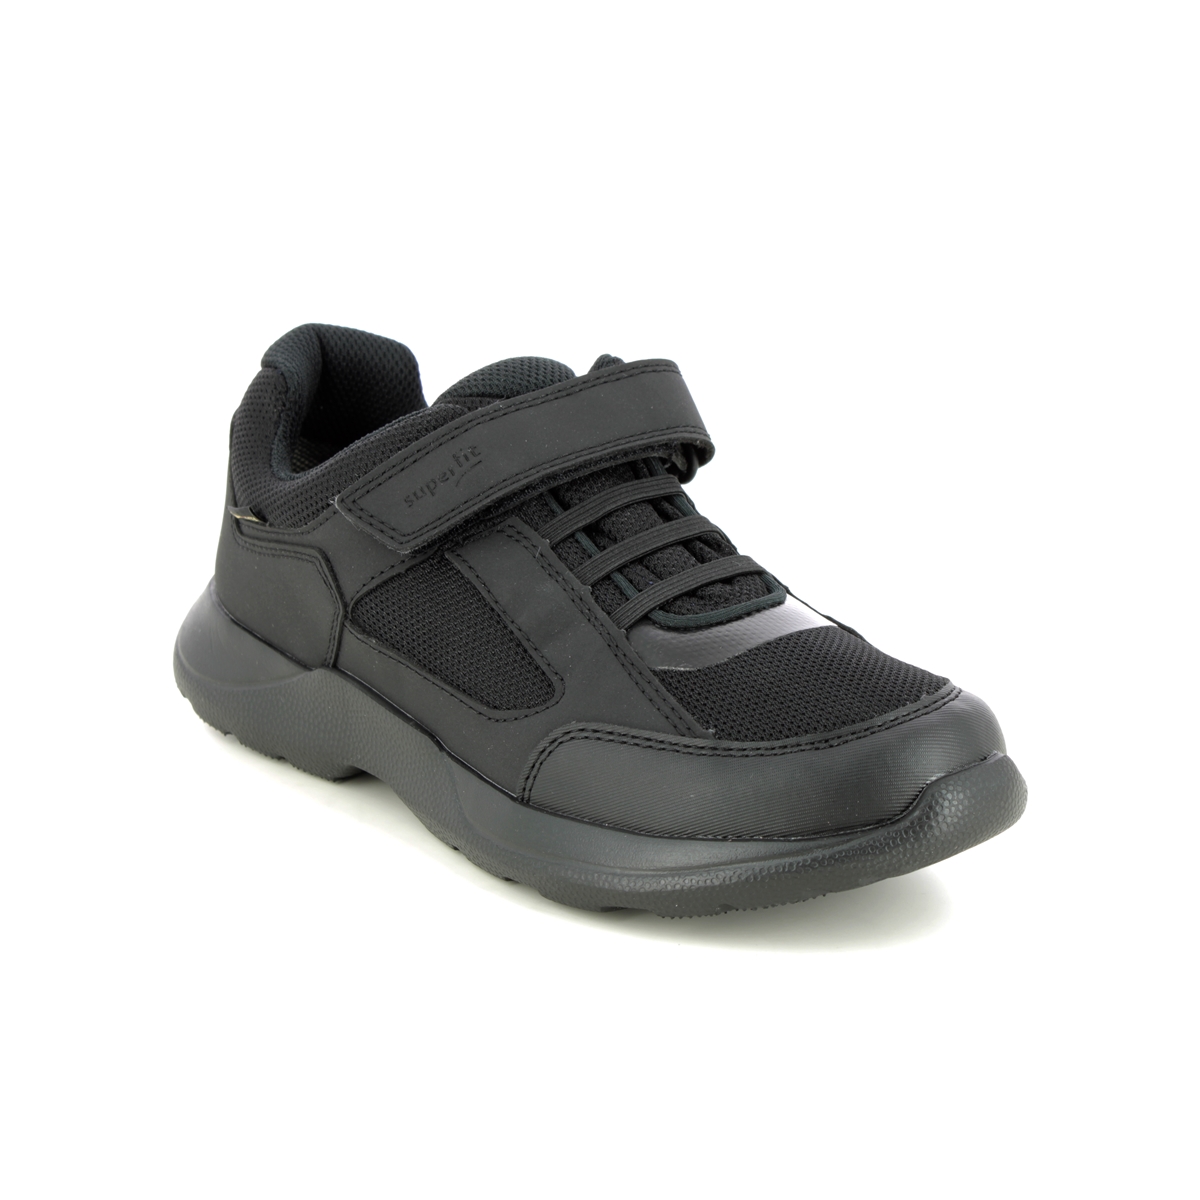 Superfit Rush Gtx Bungee Black Kids Trainers 1006223-0000 In Size 33 In Plain Black For kids